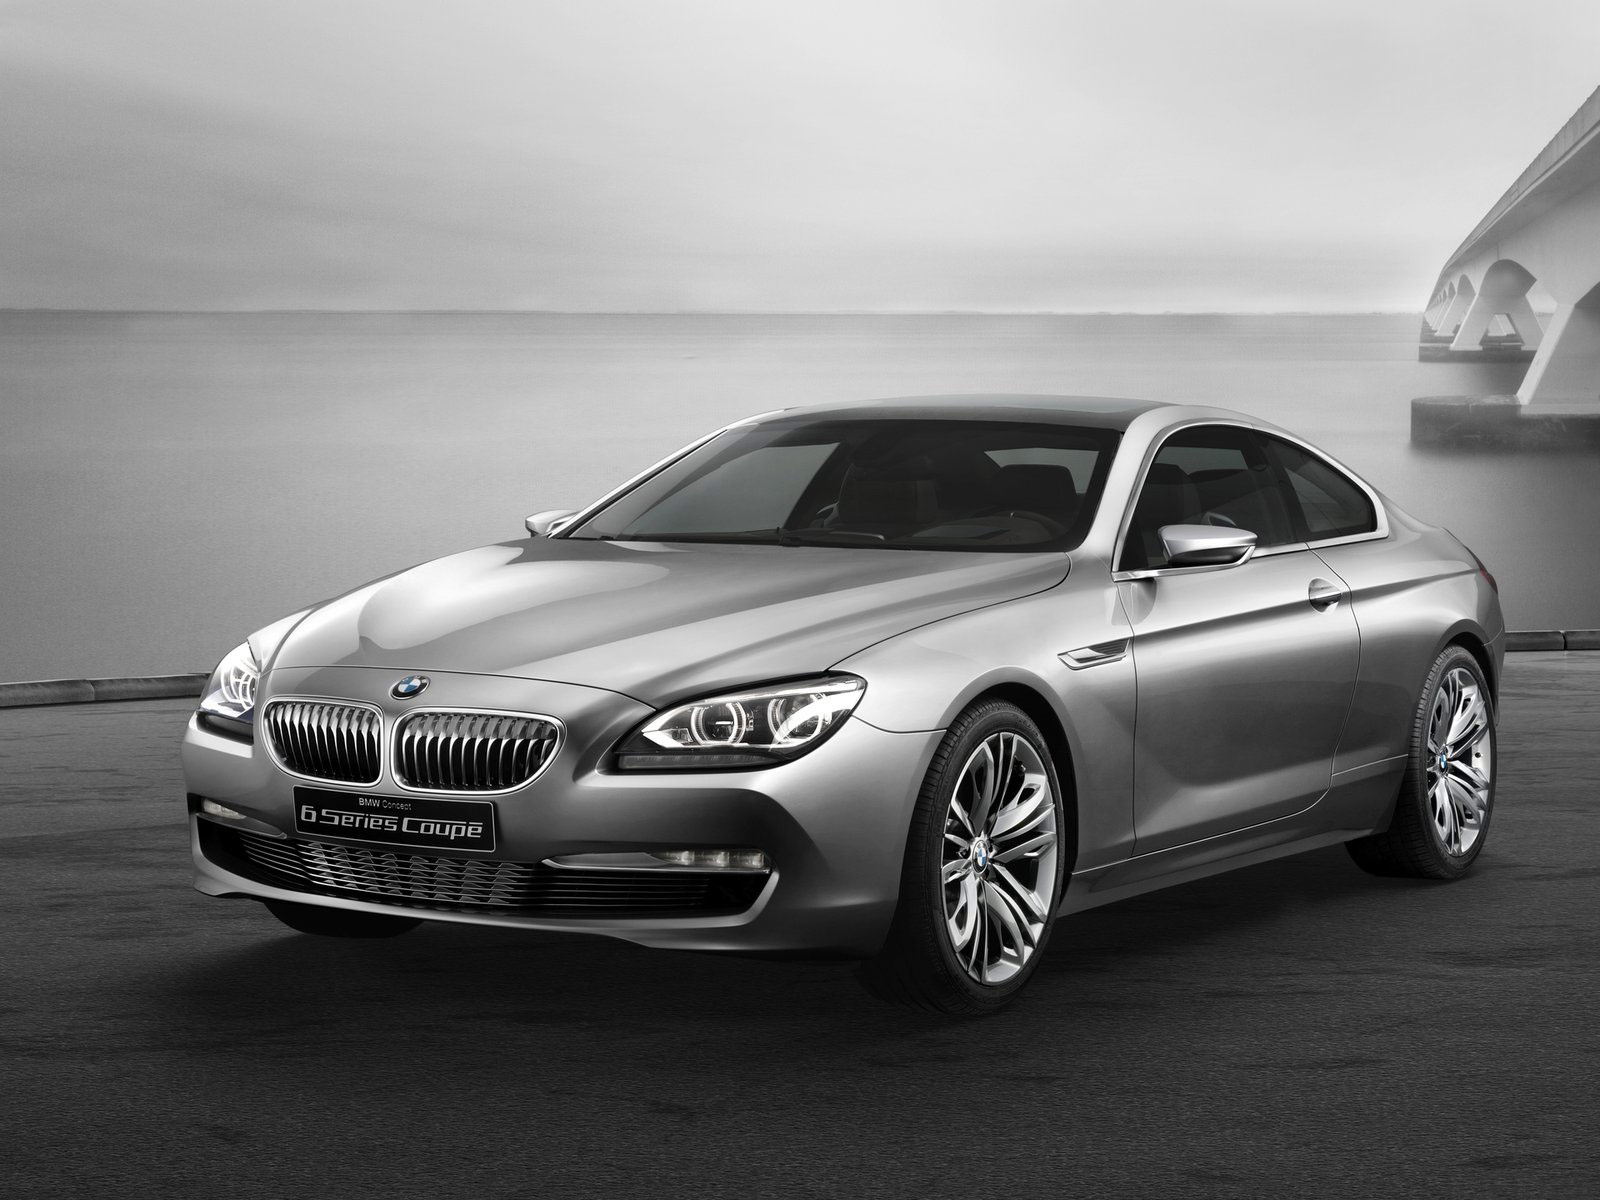 BMW 6Series Coupe Concept (2010) insurance pictures